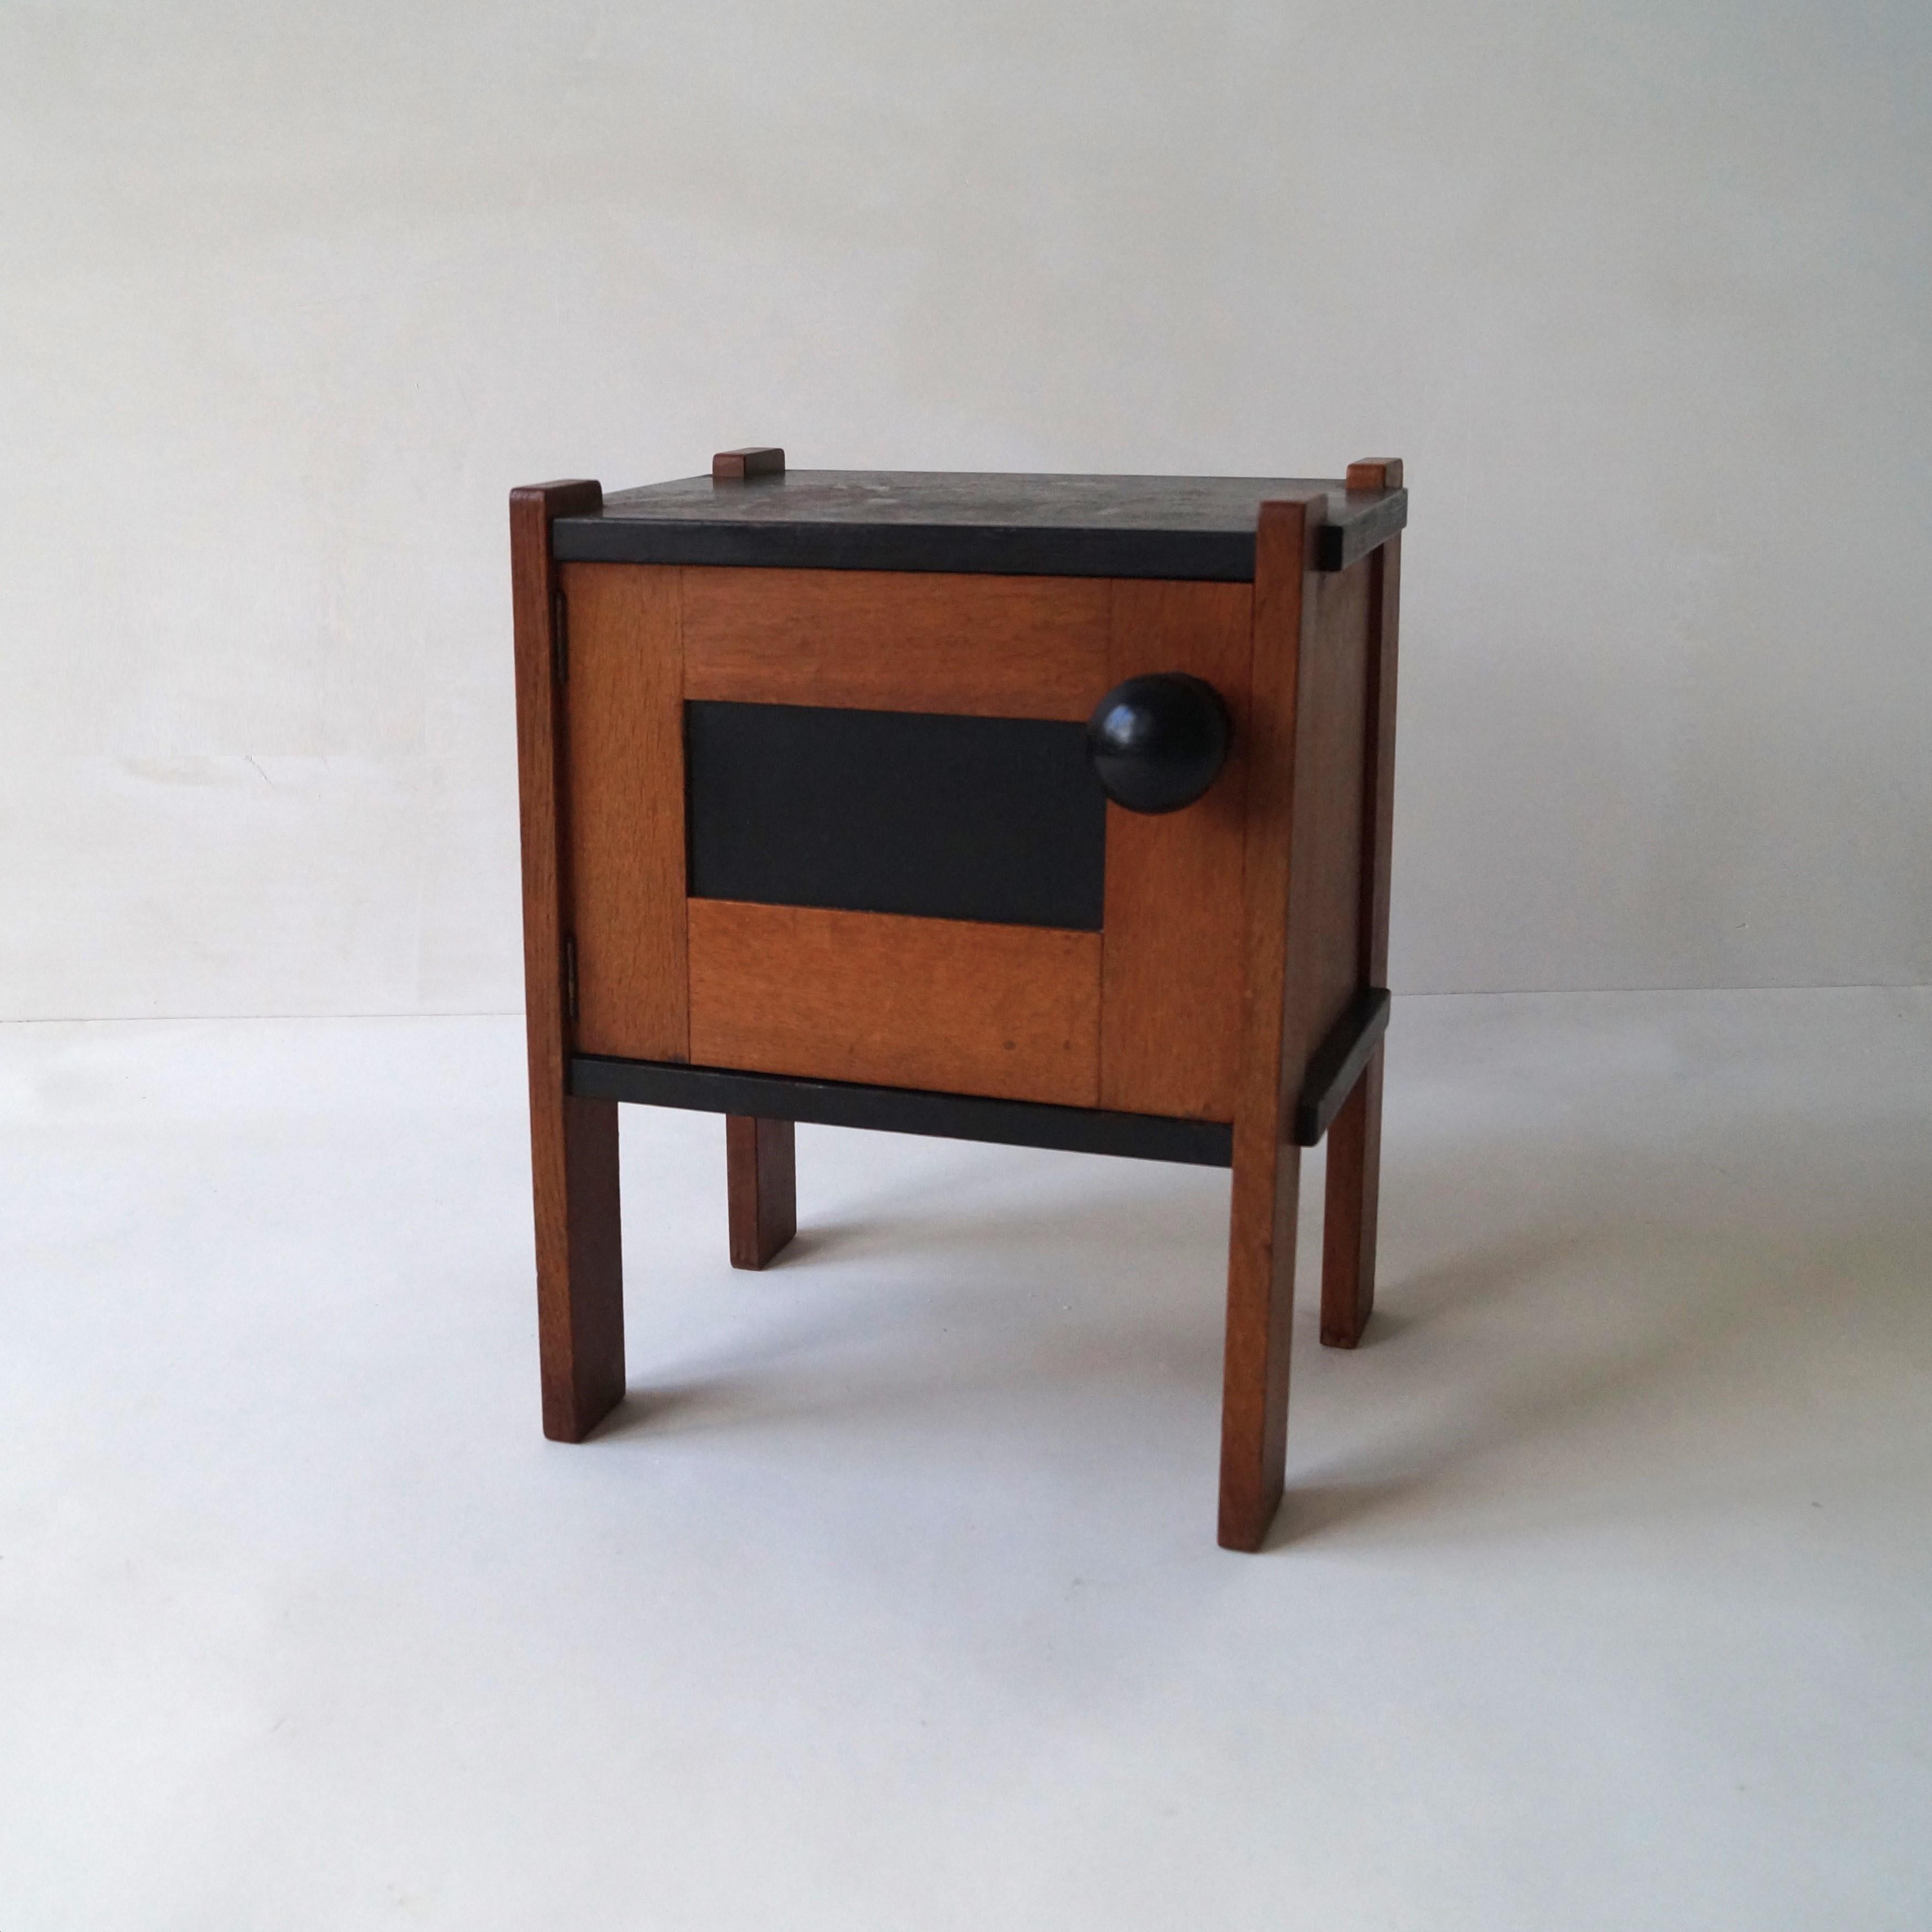 Early 20th Century Dutch Art Deco Haagse School nightstand by Cor Alons, 1920s